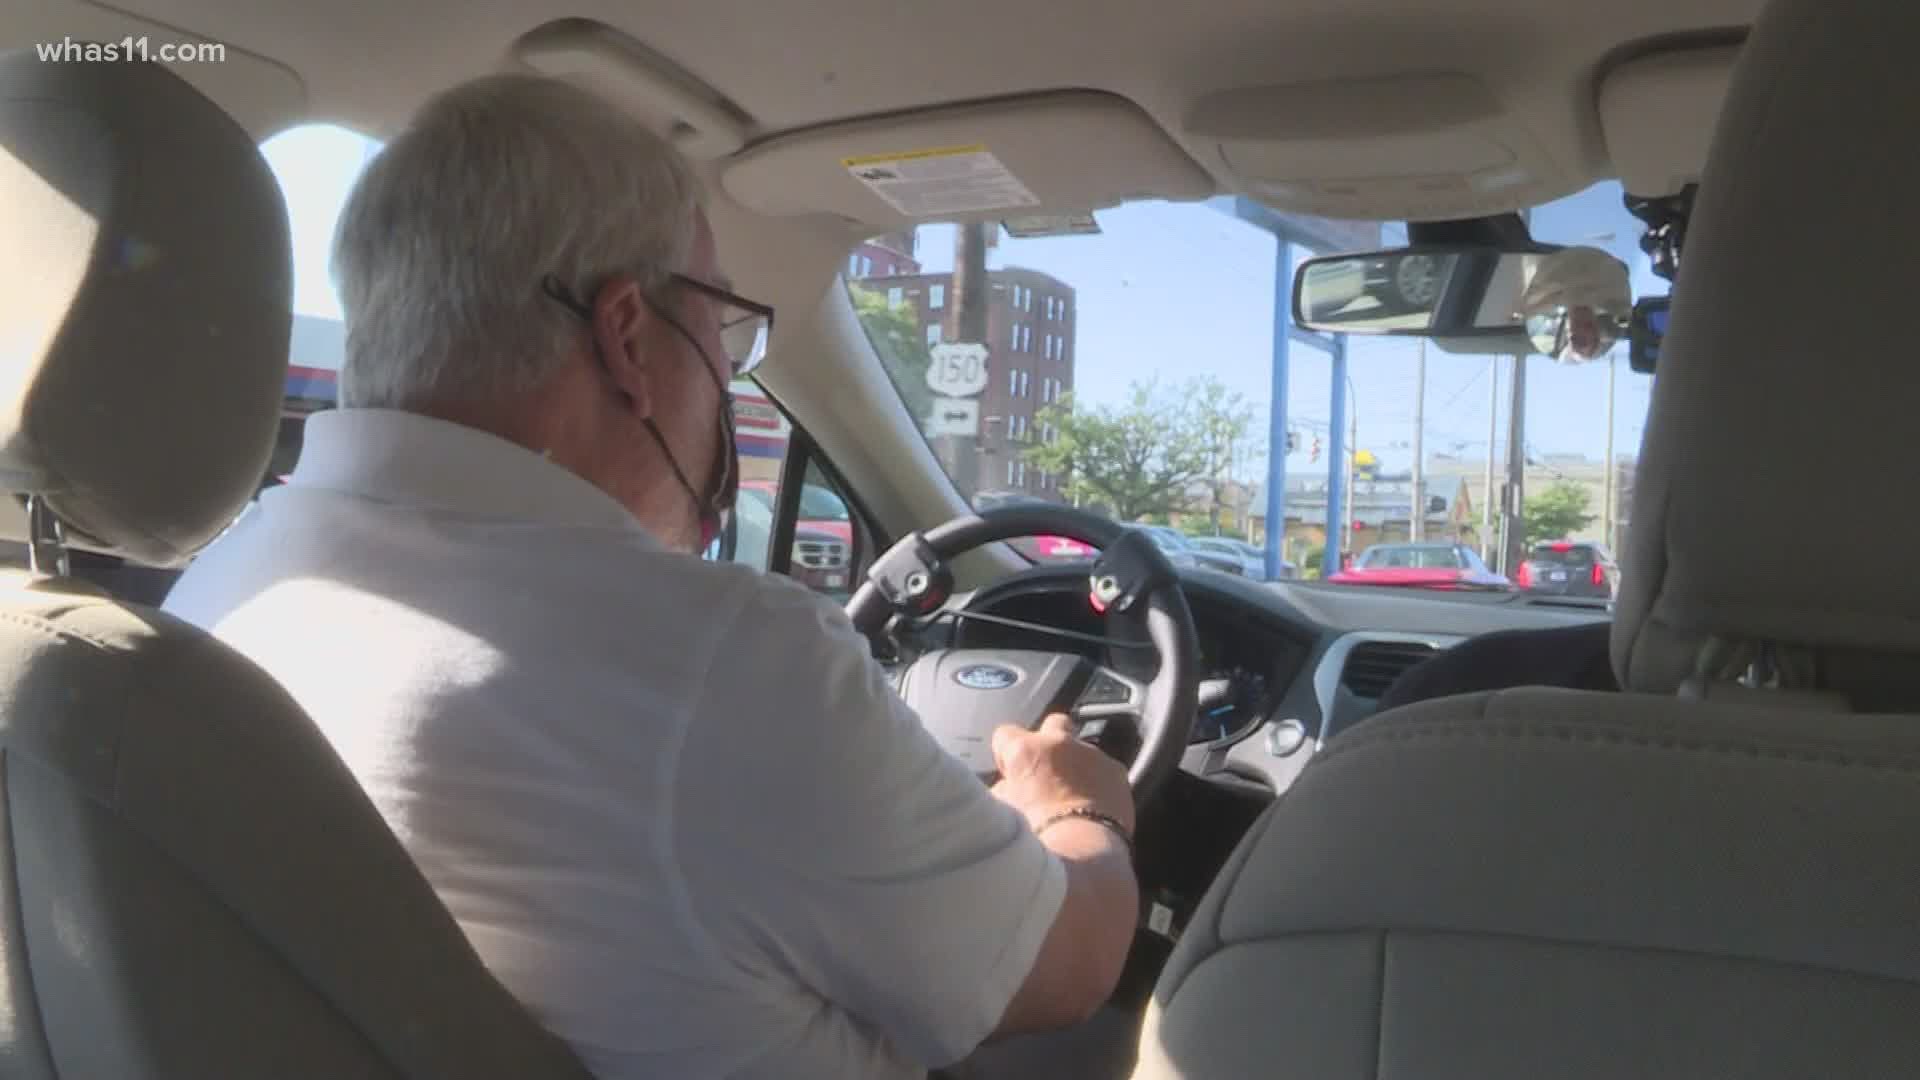 A new program through Norton Healthcare helps give adults with debilitating health conditions the ability to drive again.